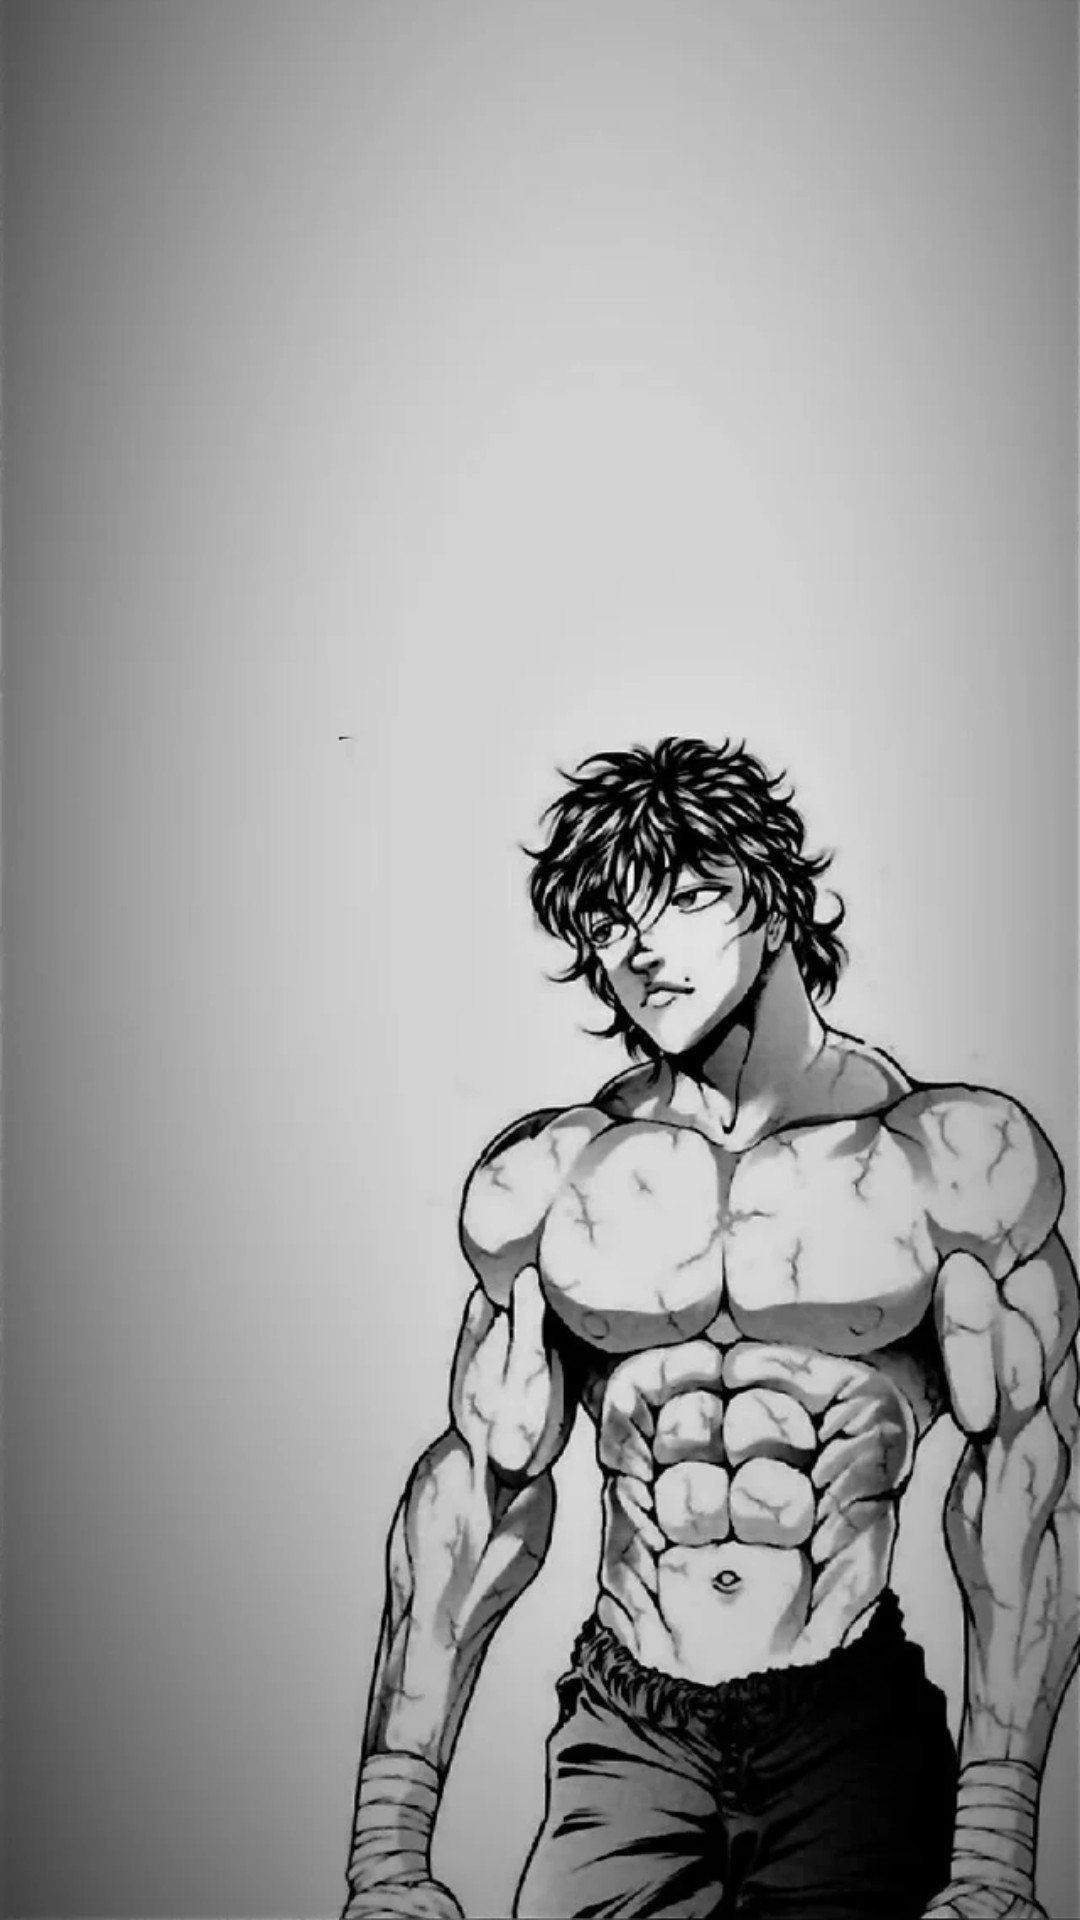 Didnt see any wallpapers of baki that I liked so I made my own :  r/iphonewallpapers